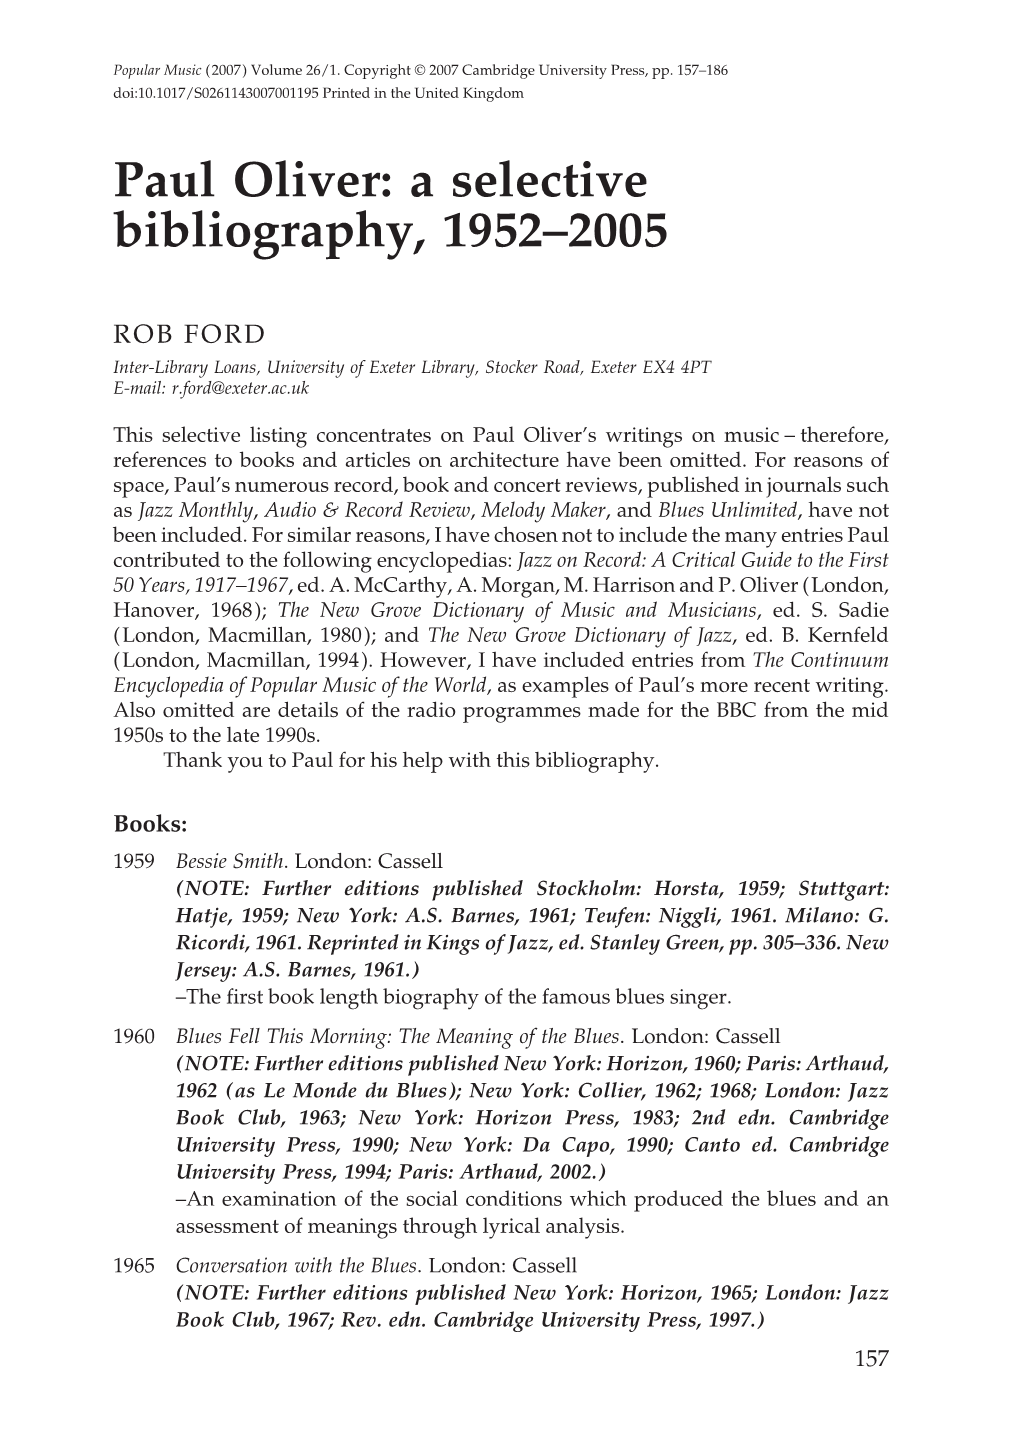 Paul Oliver: a Selective Bibliography, 1952–2005